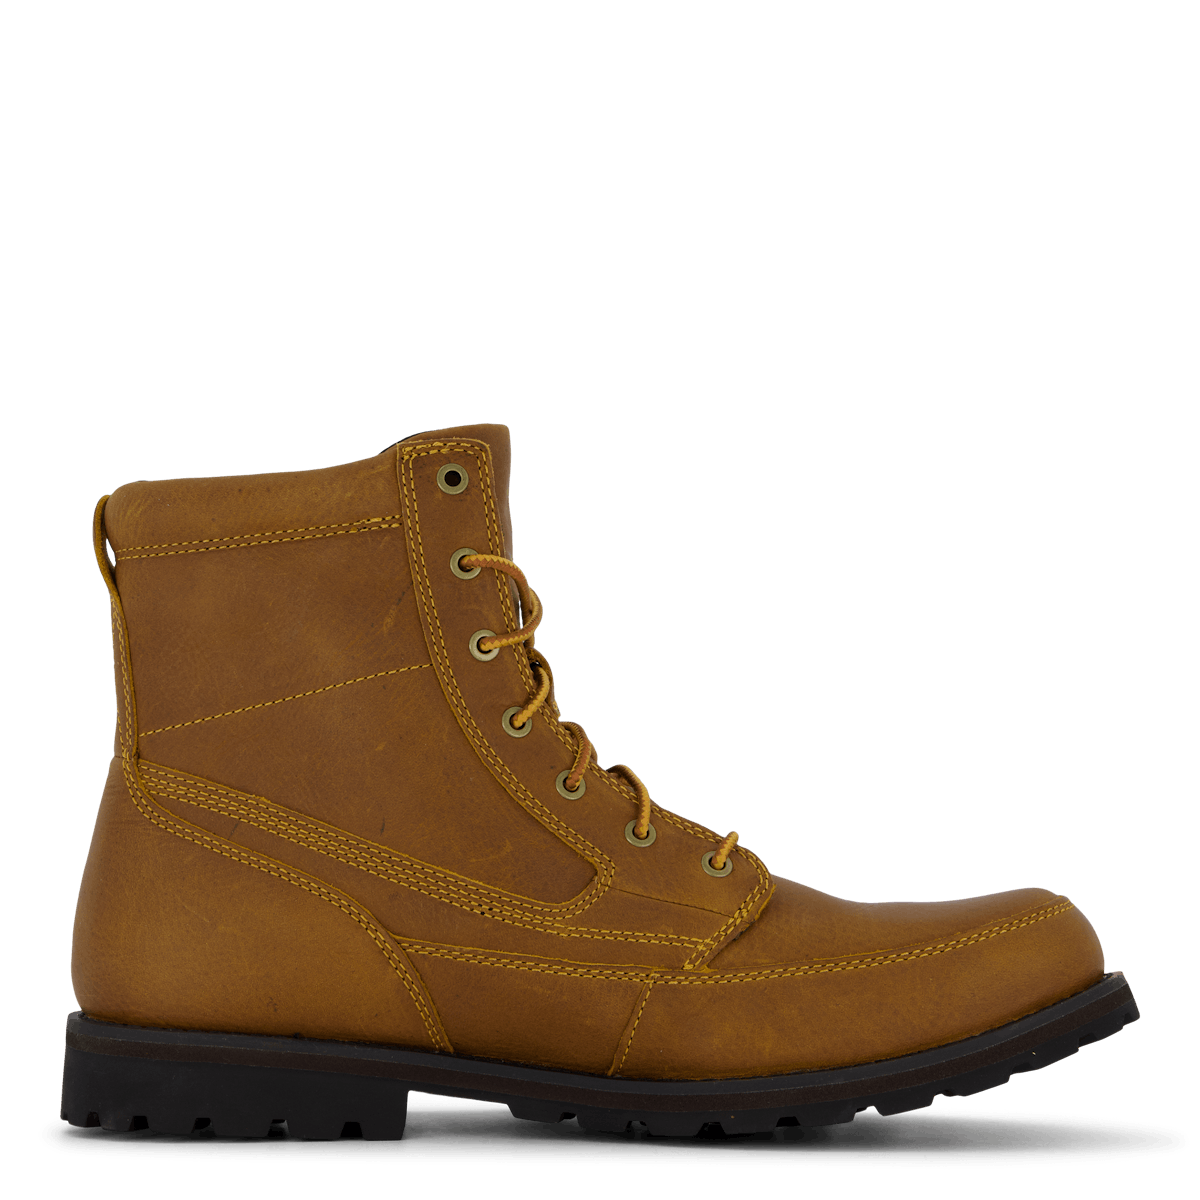 Attleboro Mid Lace Up Boot Whe Wheat